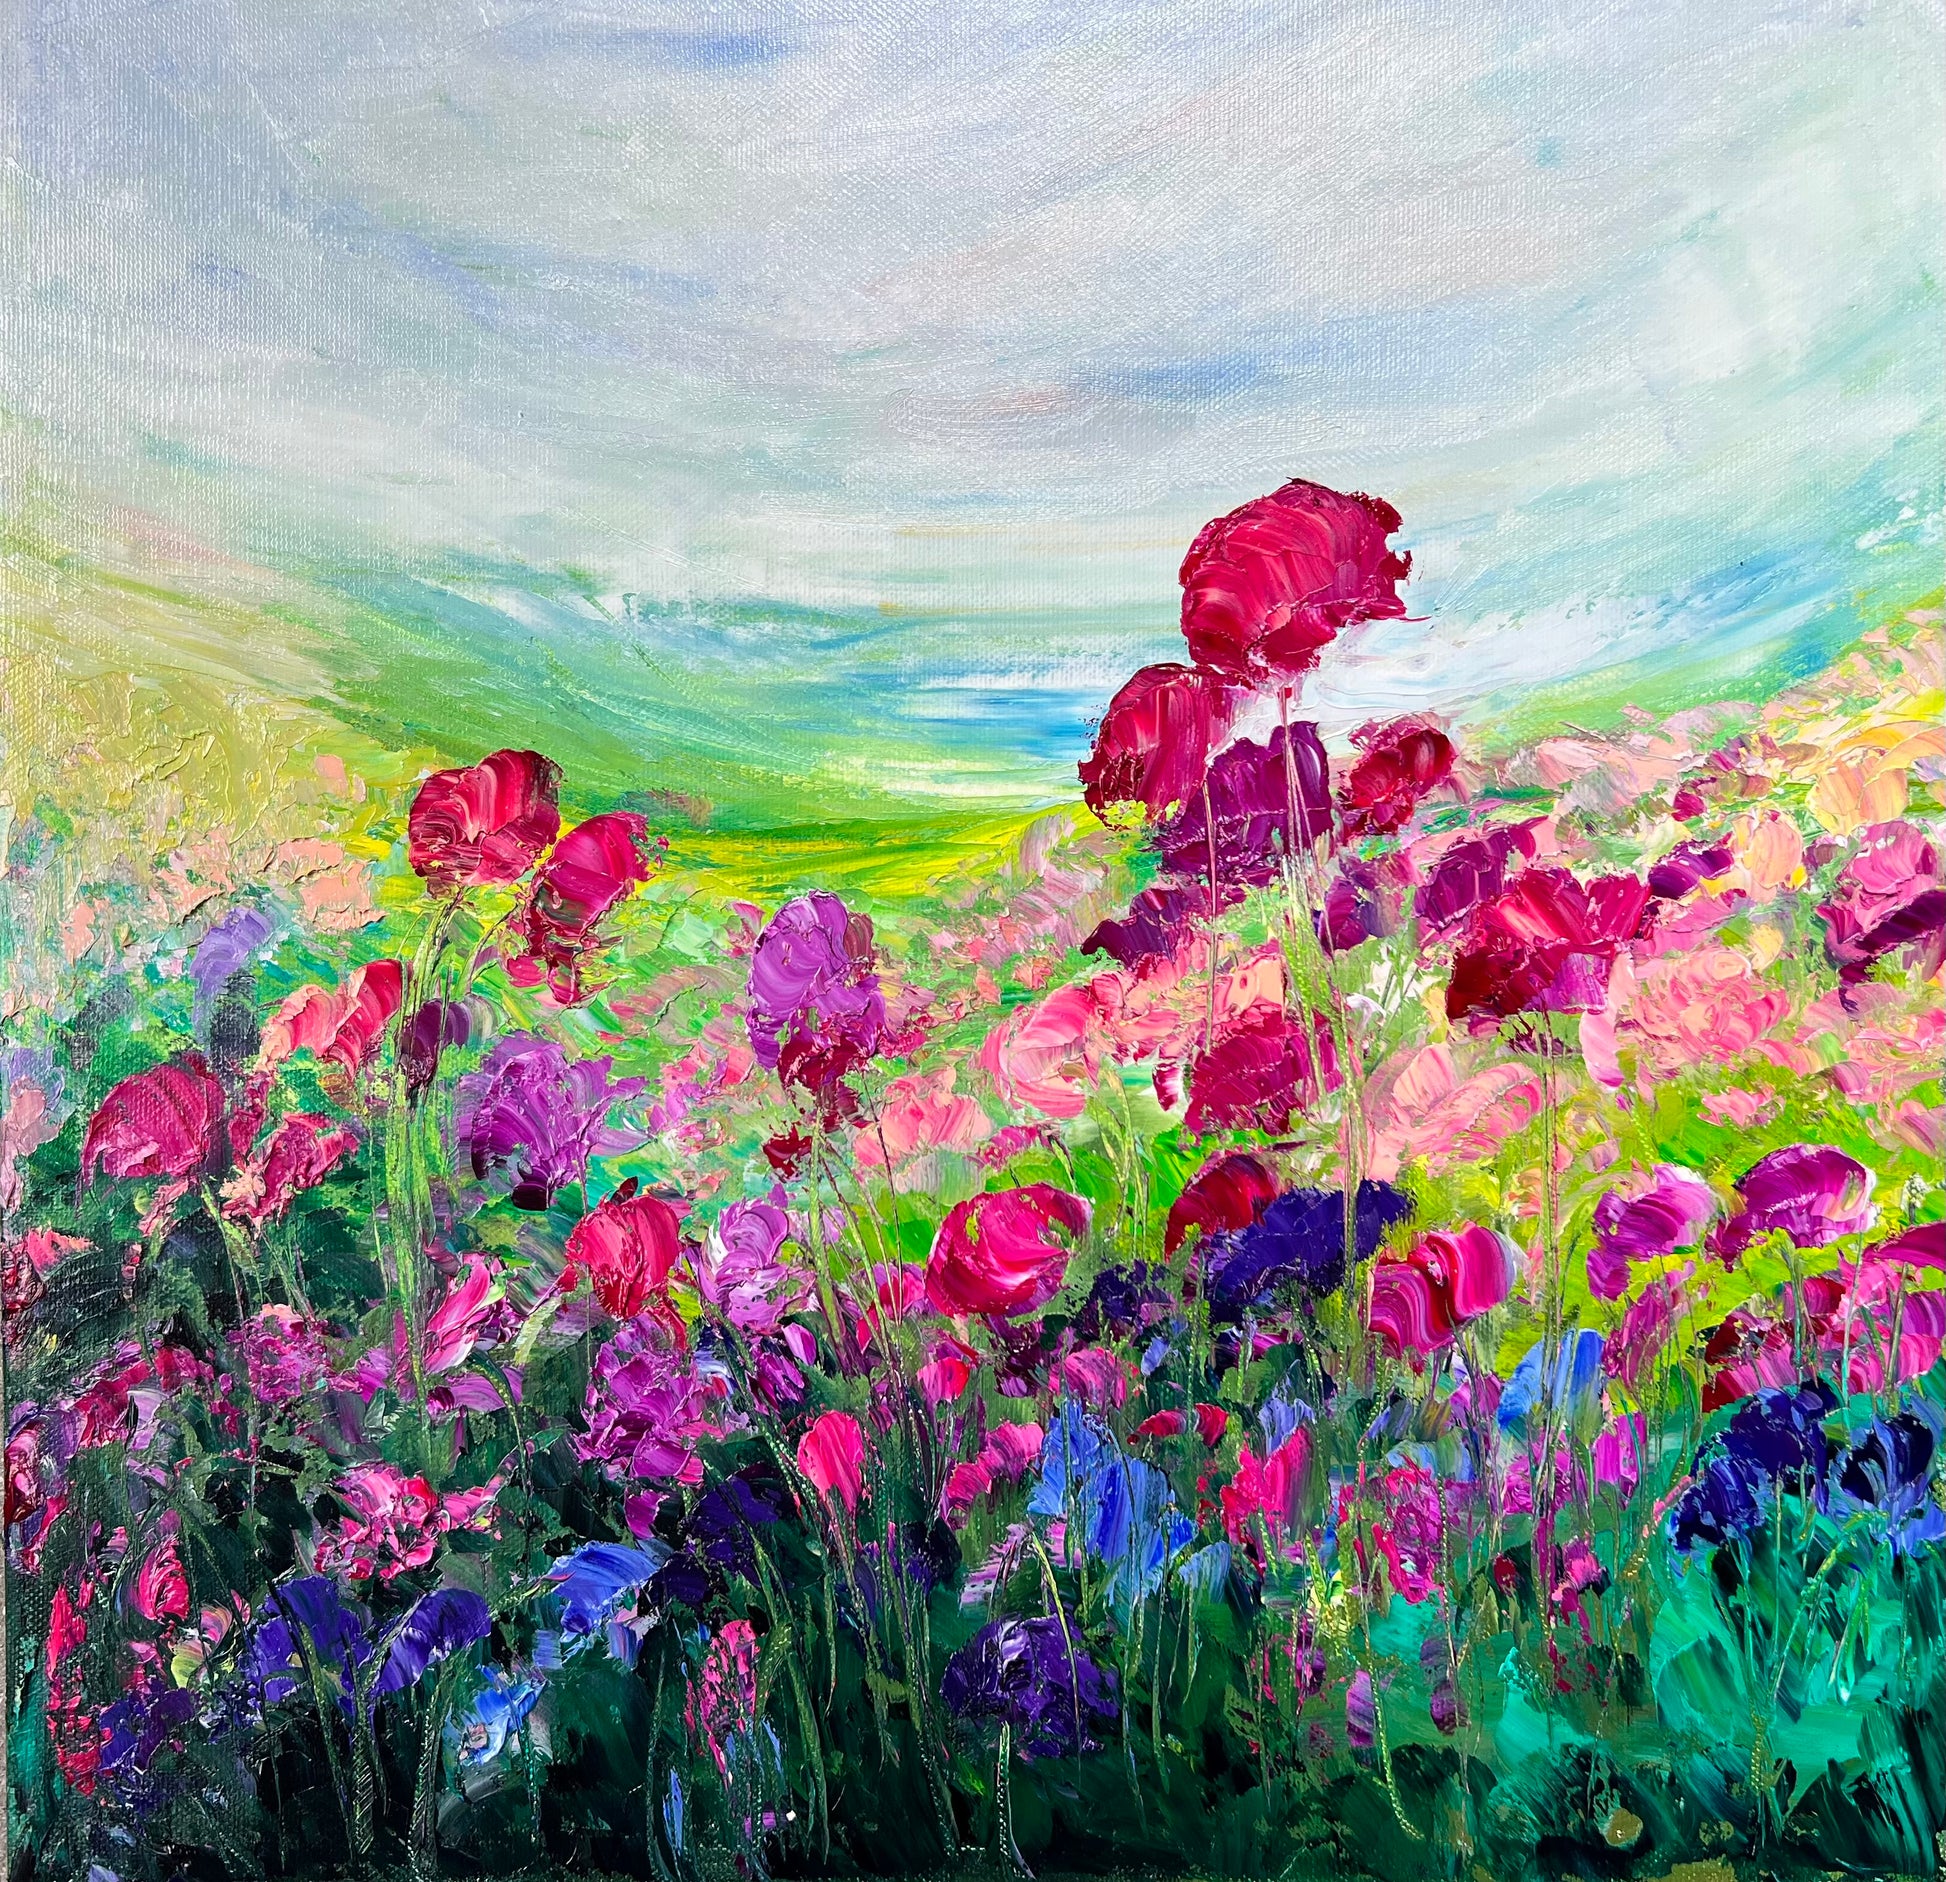 16" x 16" abstract impressionist oil painting of a field of carnations in purples and pinks